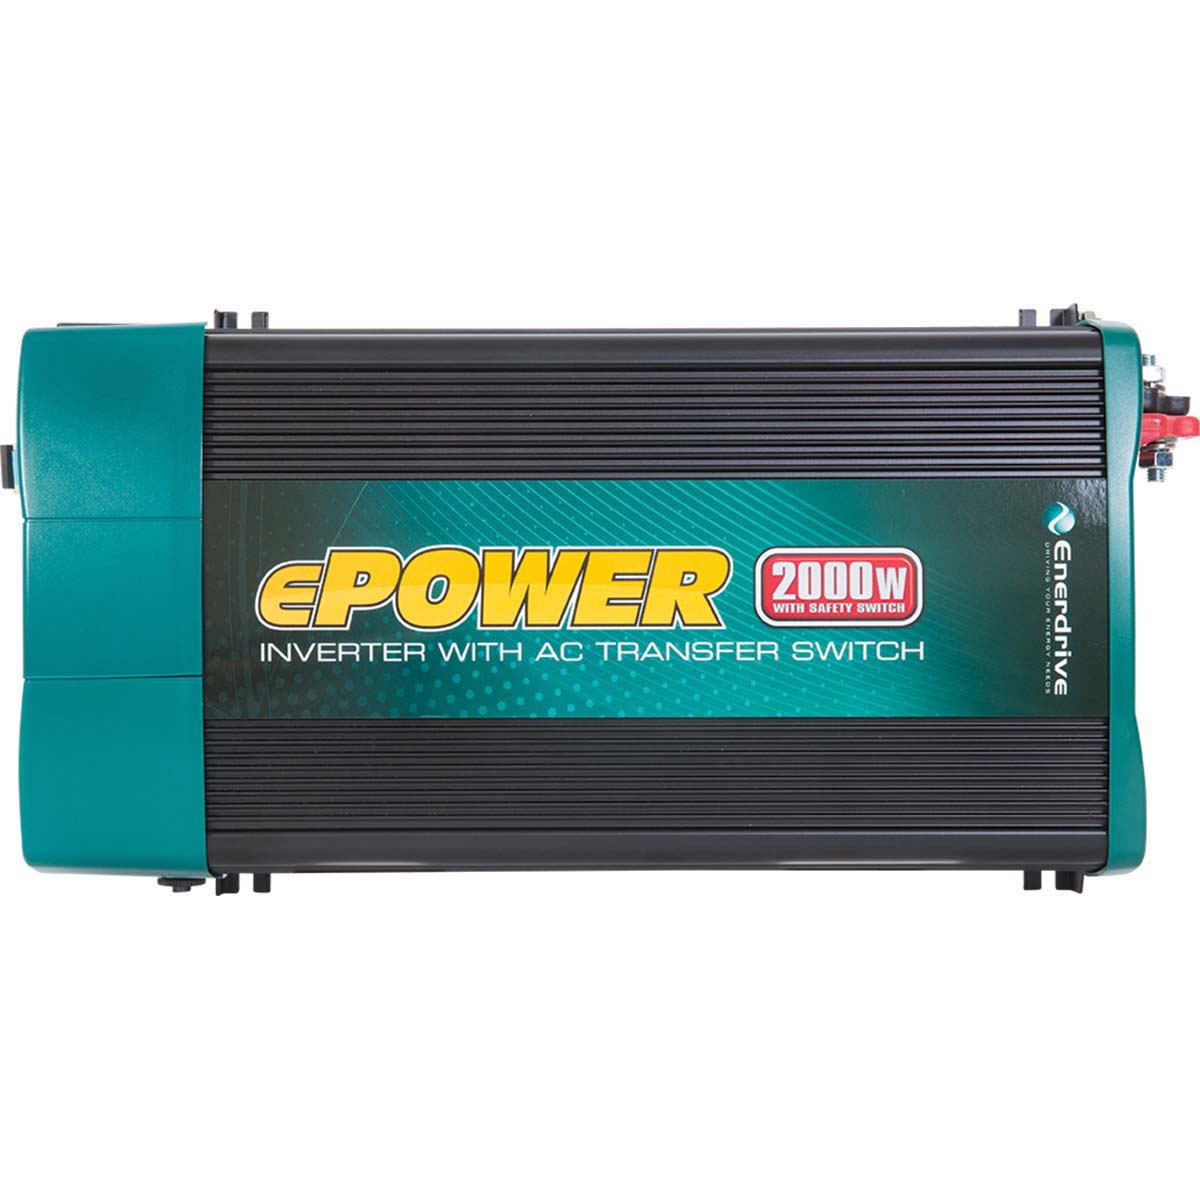 Enerdrive True Sine Wave Inverter with AC Transfer and Safety Switch 2000W